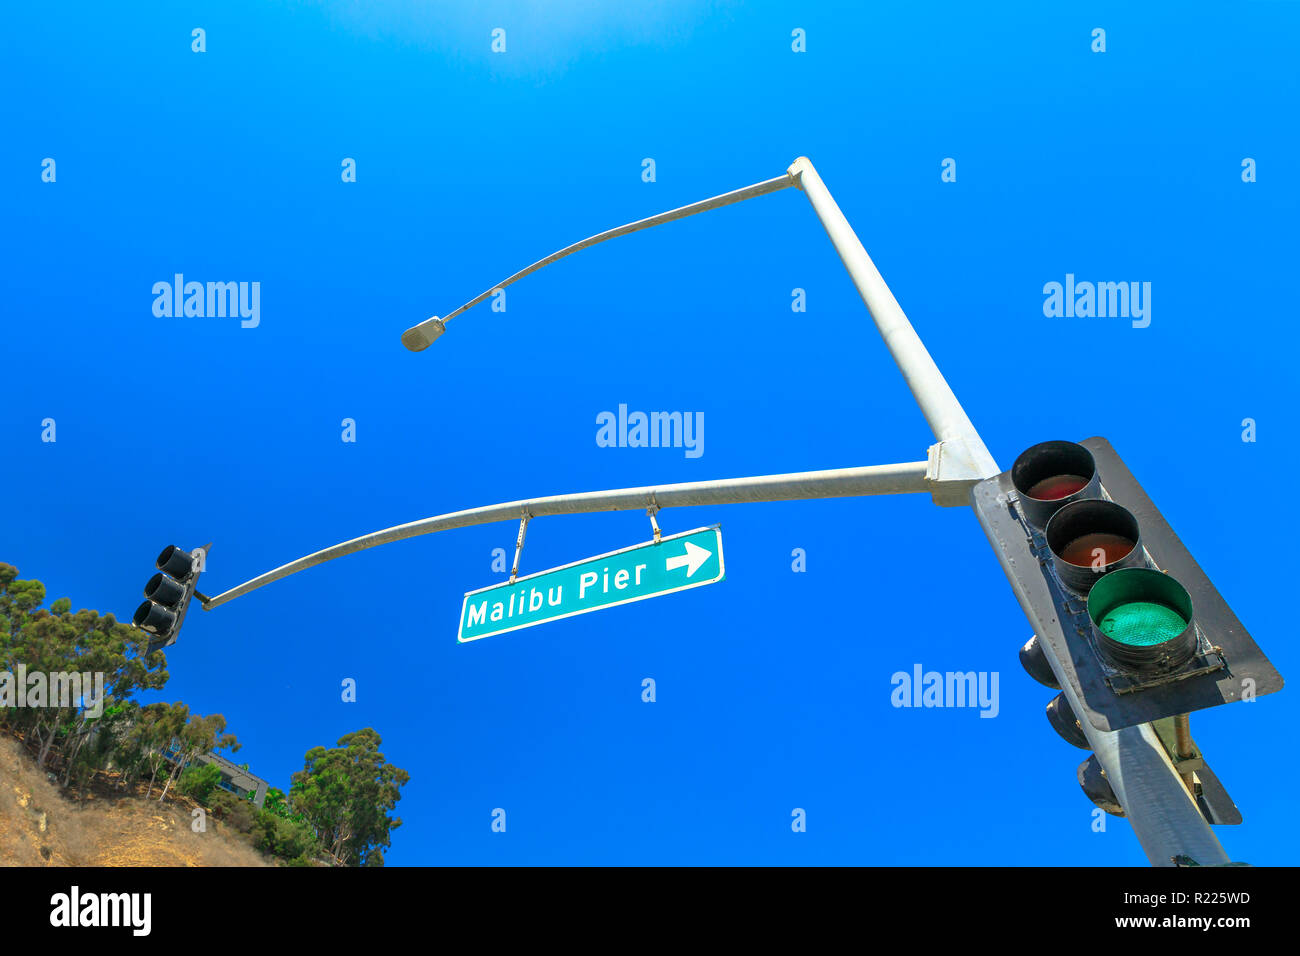 Bottom view of green Traffic Light and Malibu Pier Sign in the sunny day with blue sky. Malibu Pier is a historic landmark in California, on the Pacific Coast Highway, United States. Copy space. Stock Photo